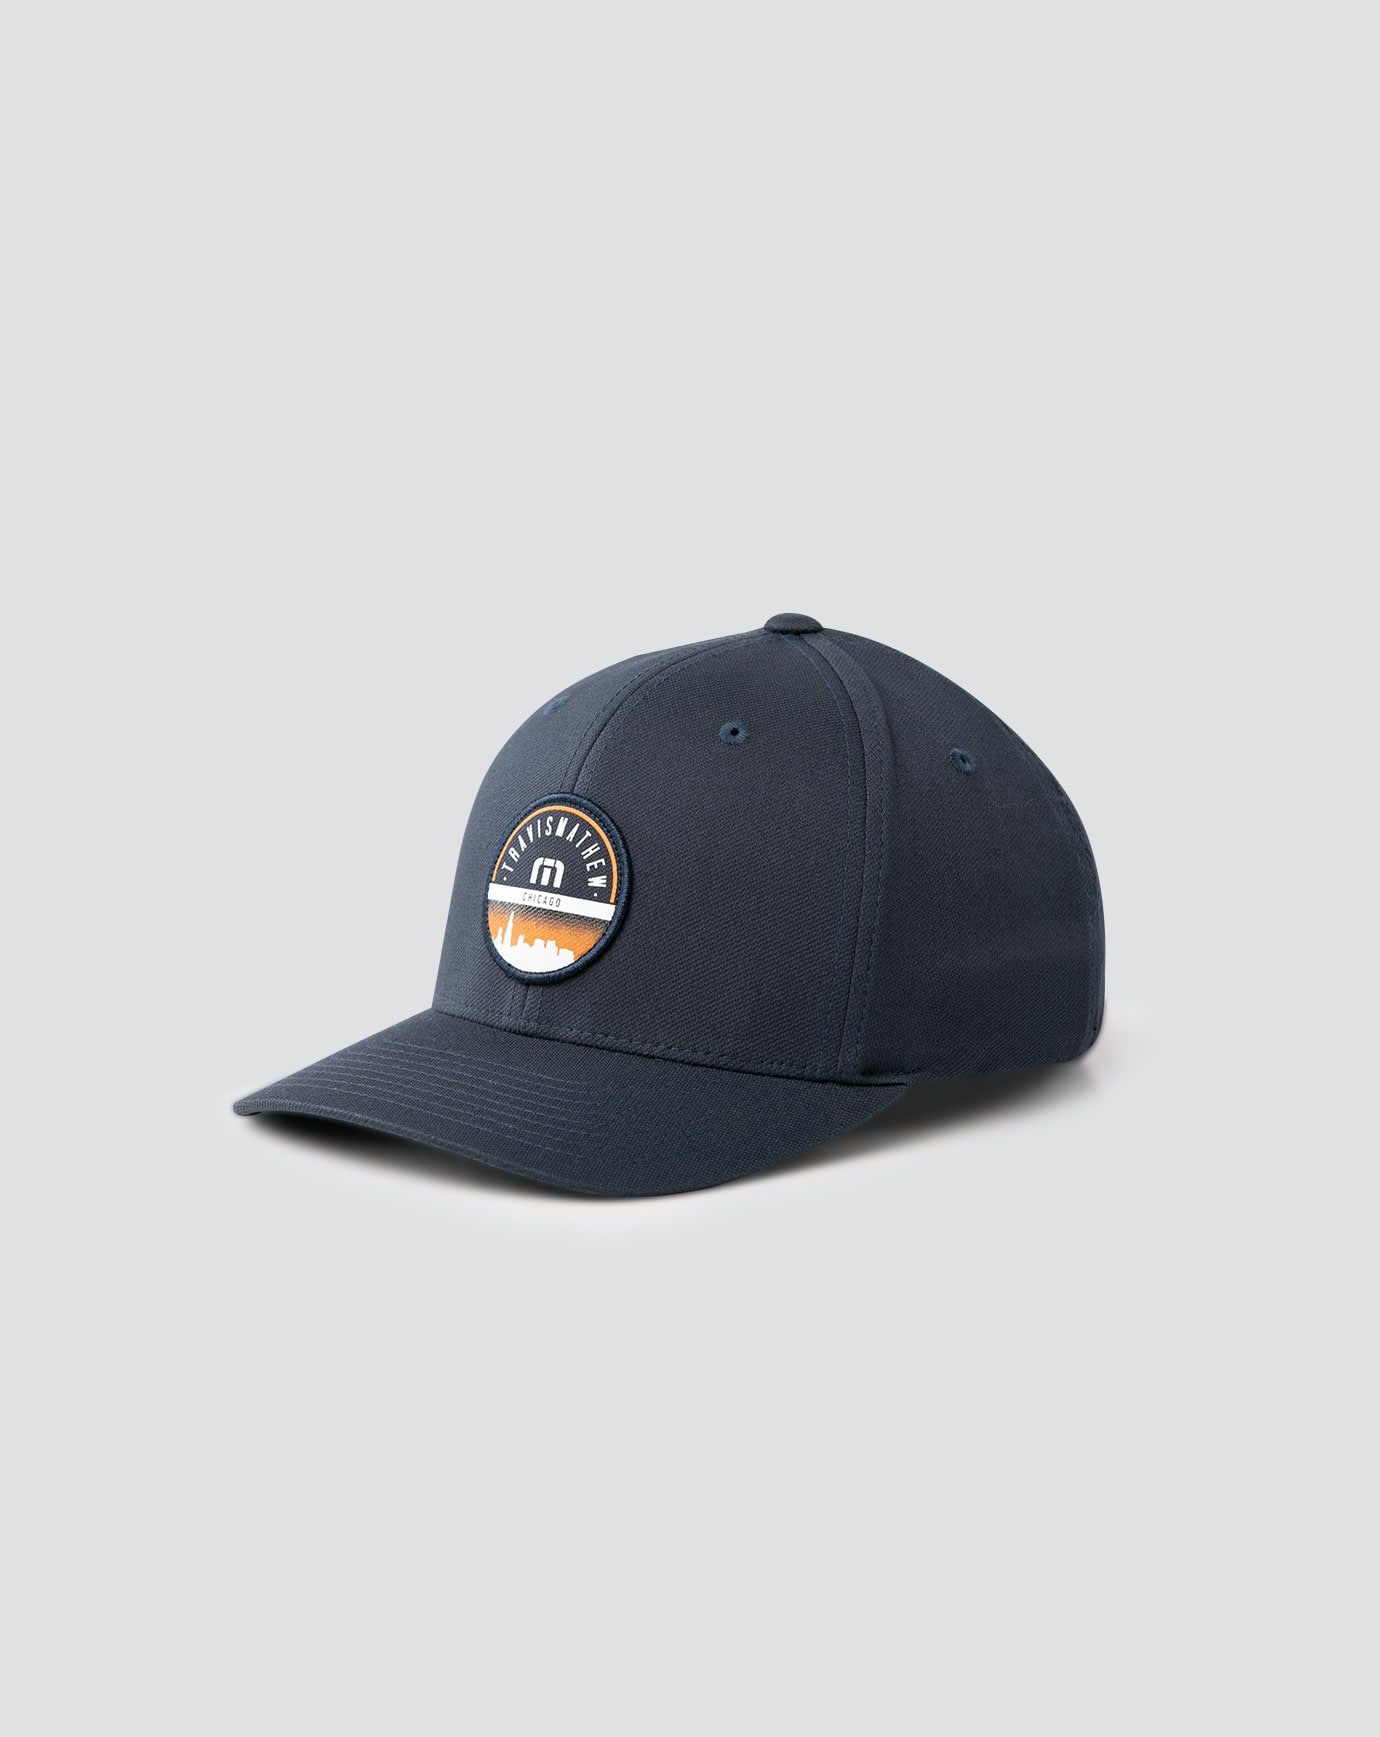 LINCOLN PARK FITTED HAT Image Thumbnail 2